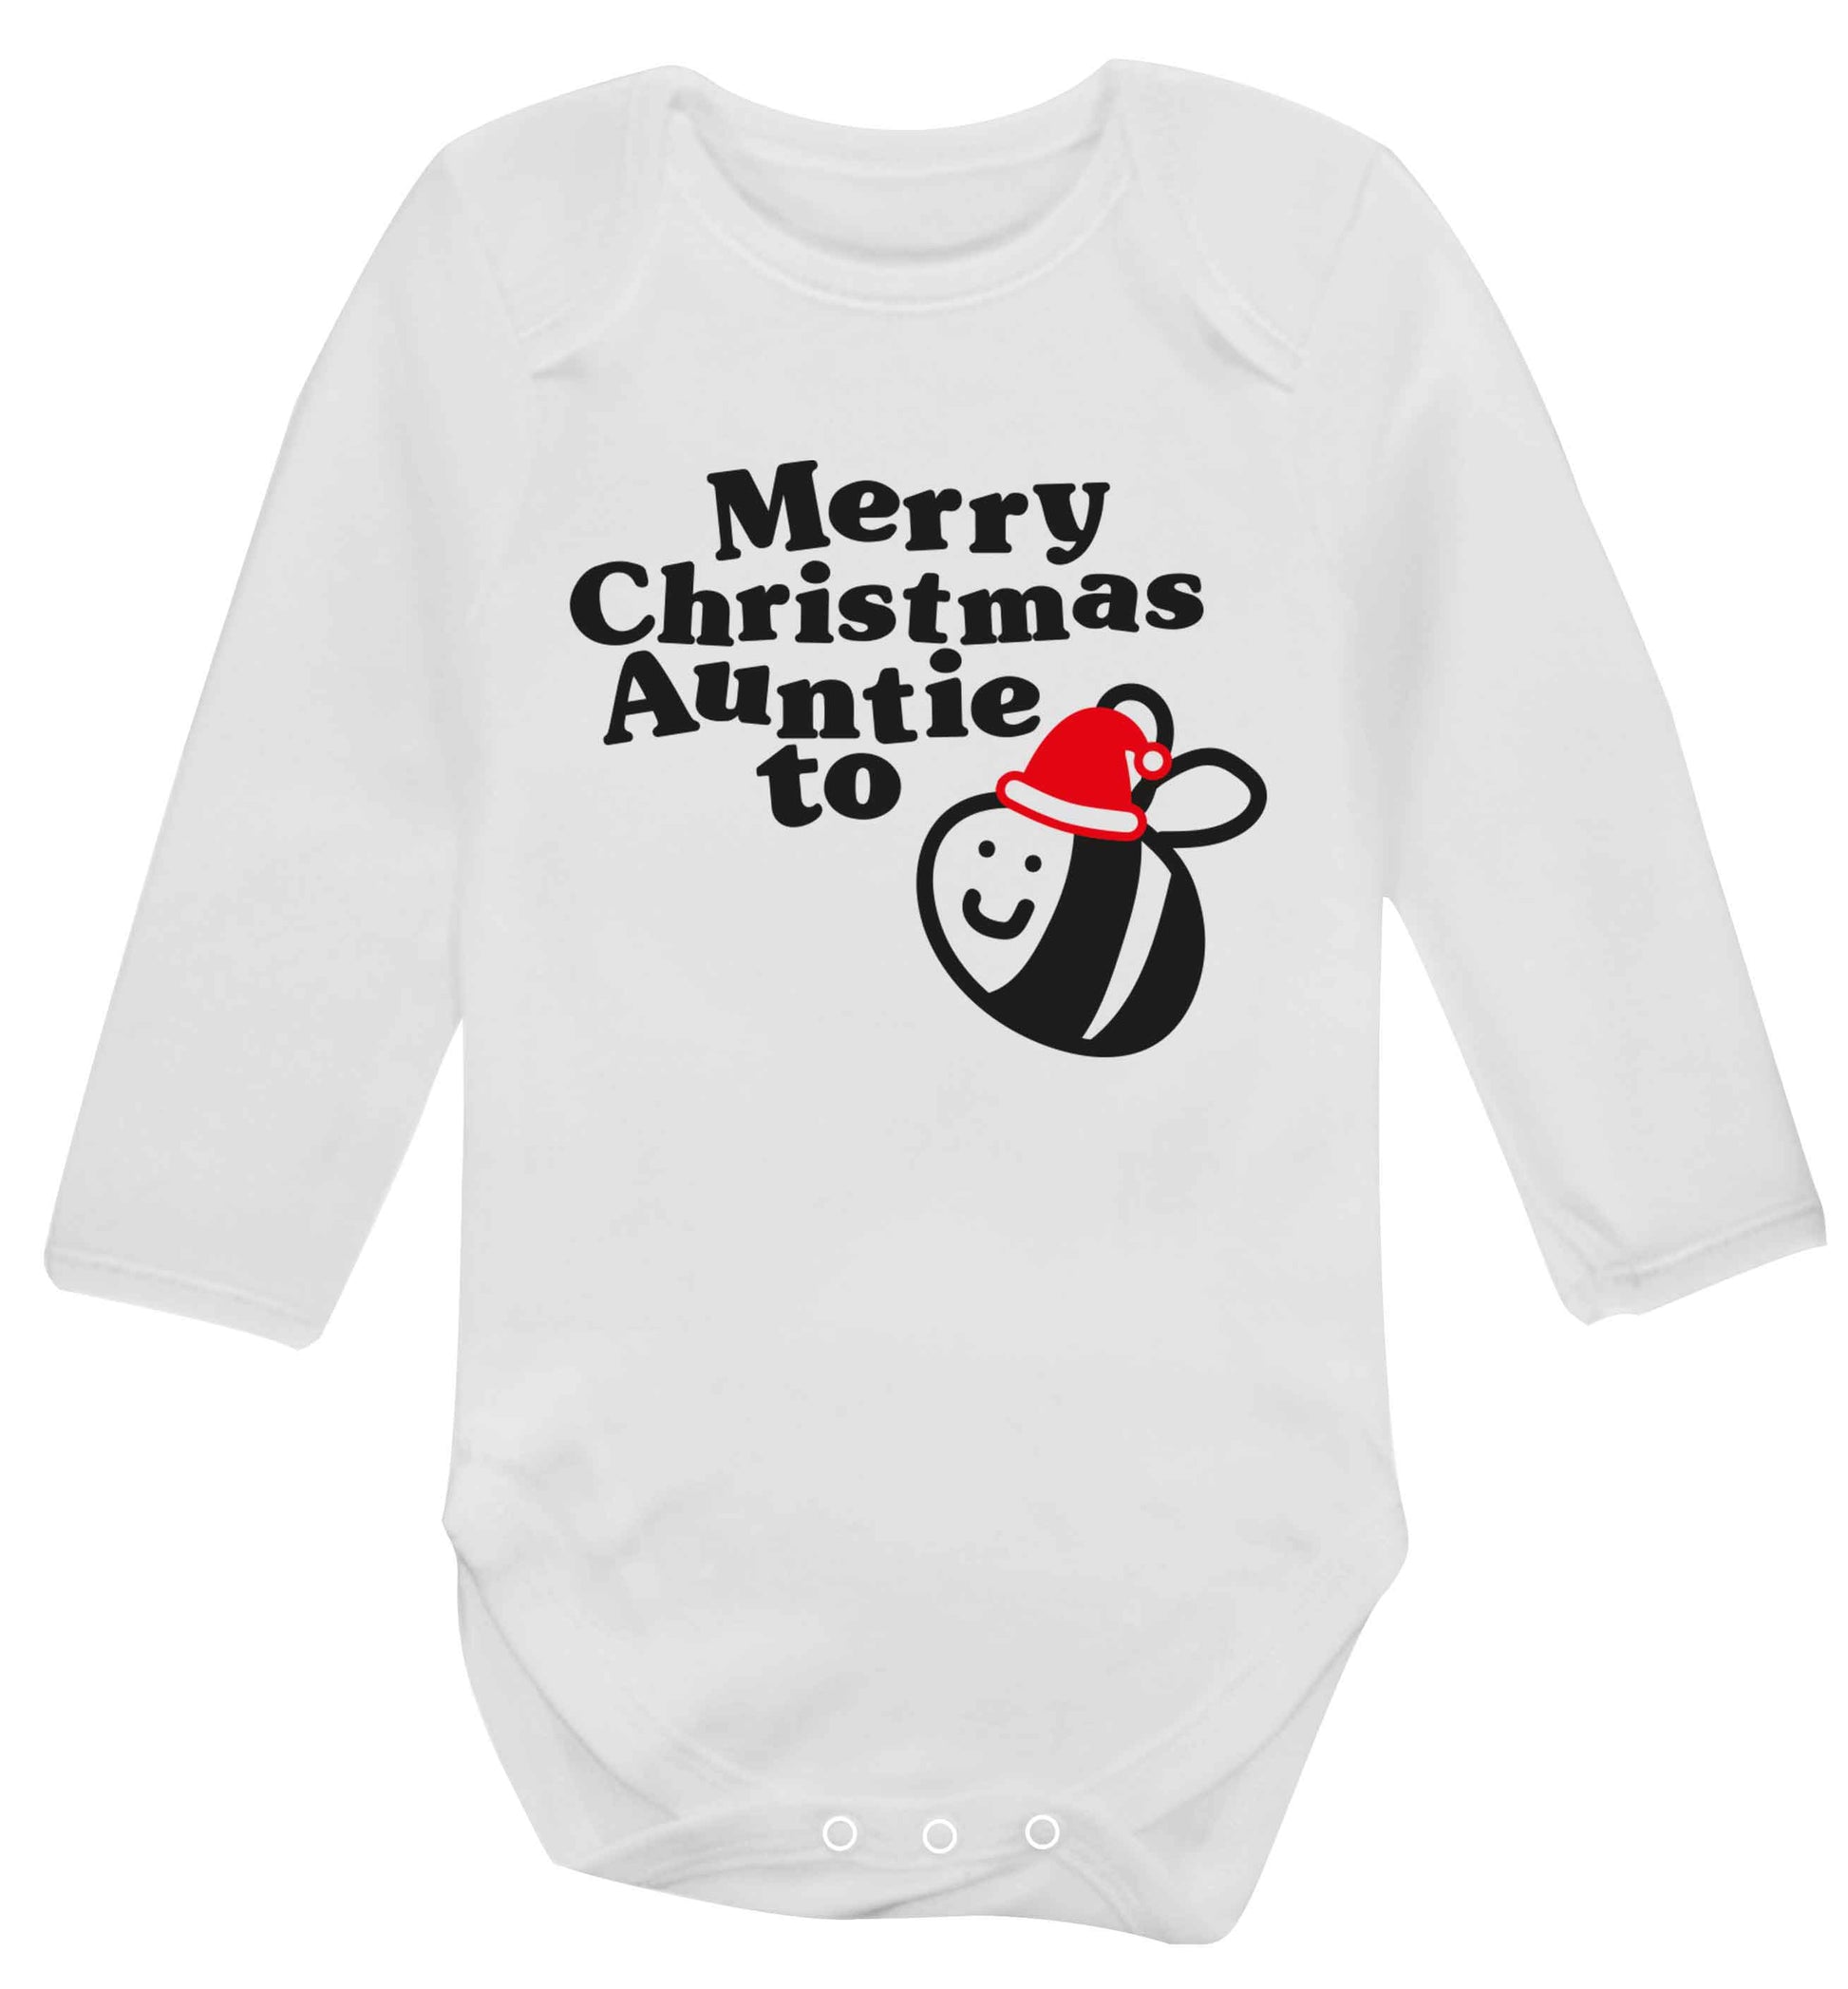 Merry Christmas auntie to be Baby Vest long sleeved white 6-12 months